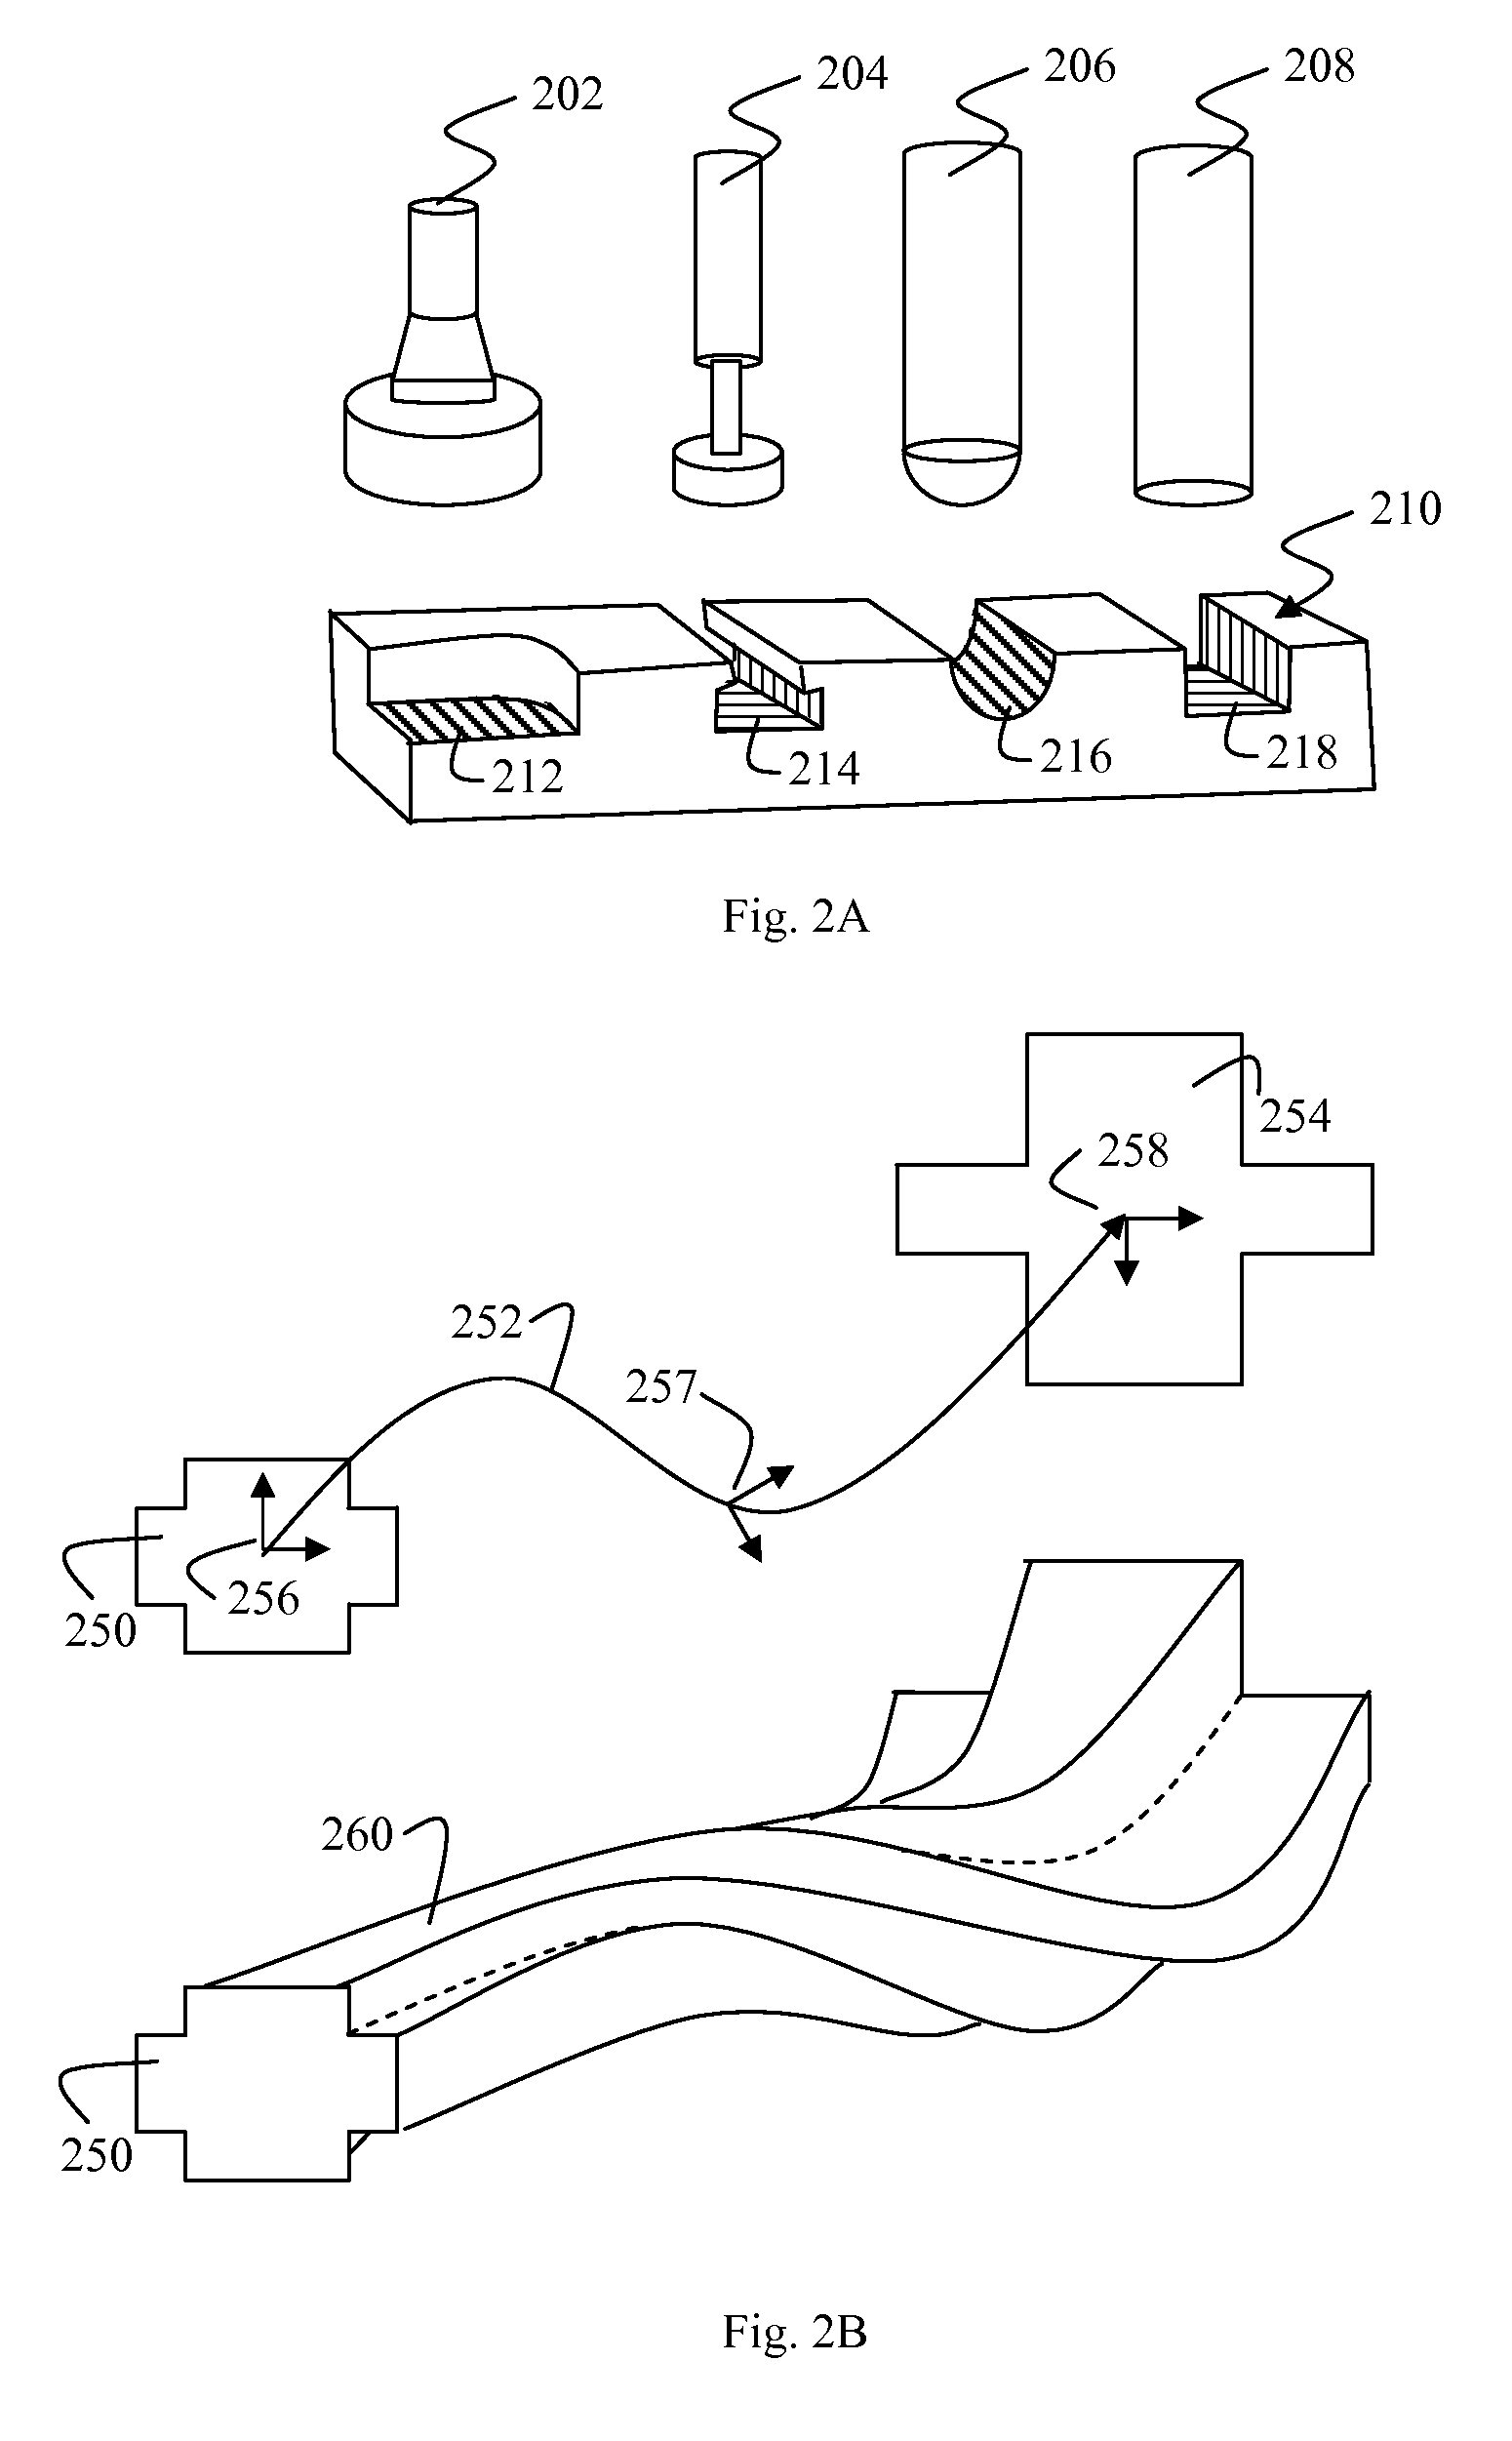 Method for simulating numerically controlled milling using adaptively sampled distance fields